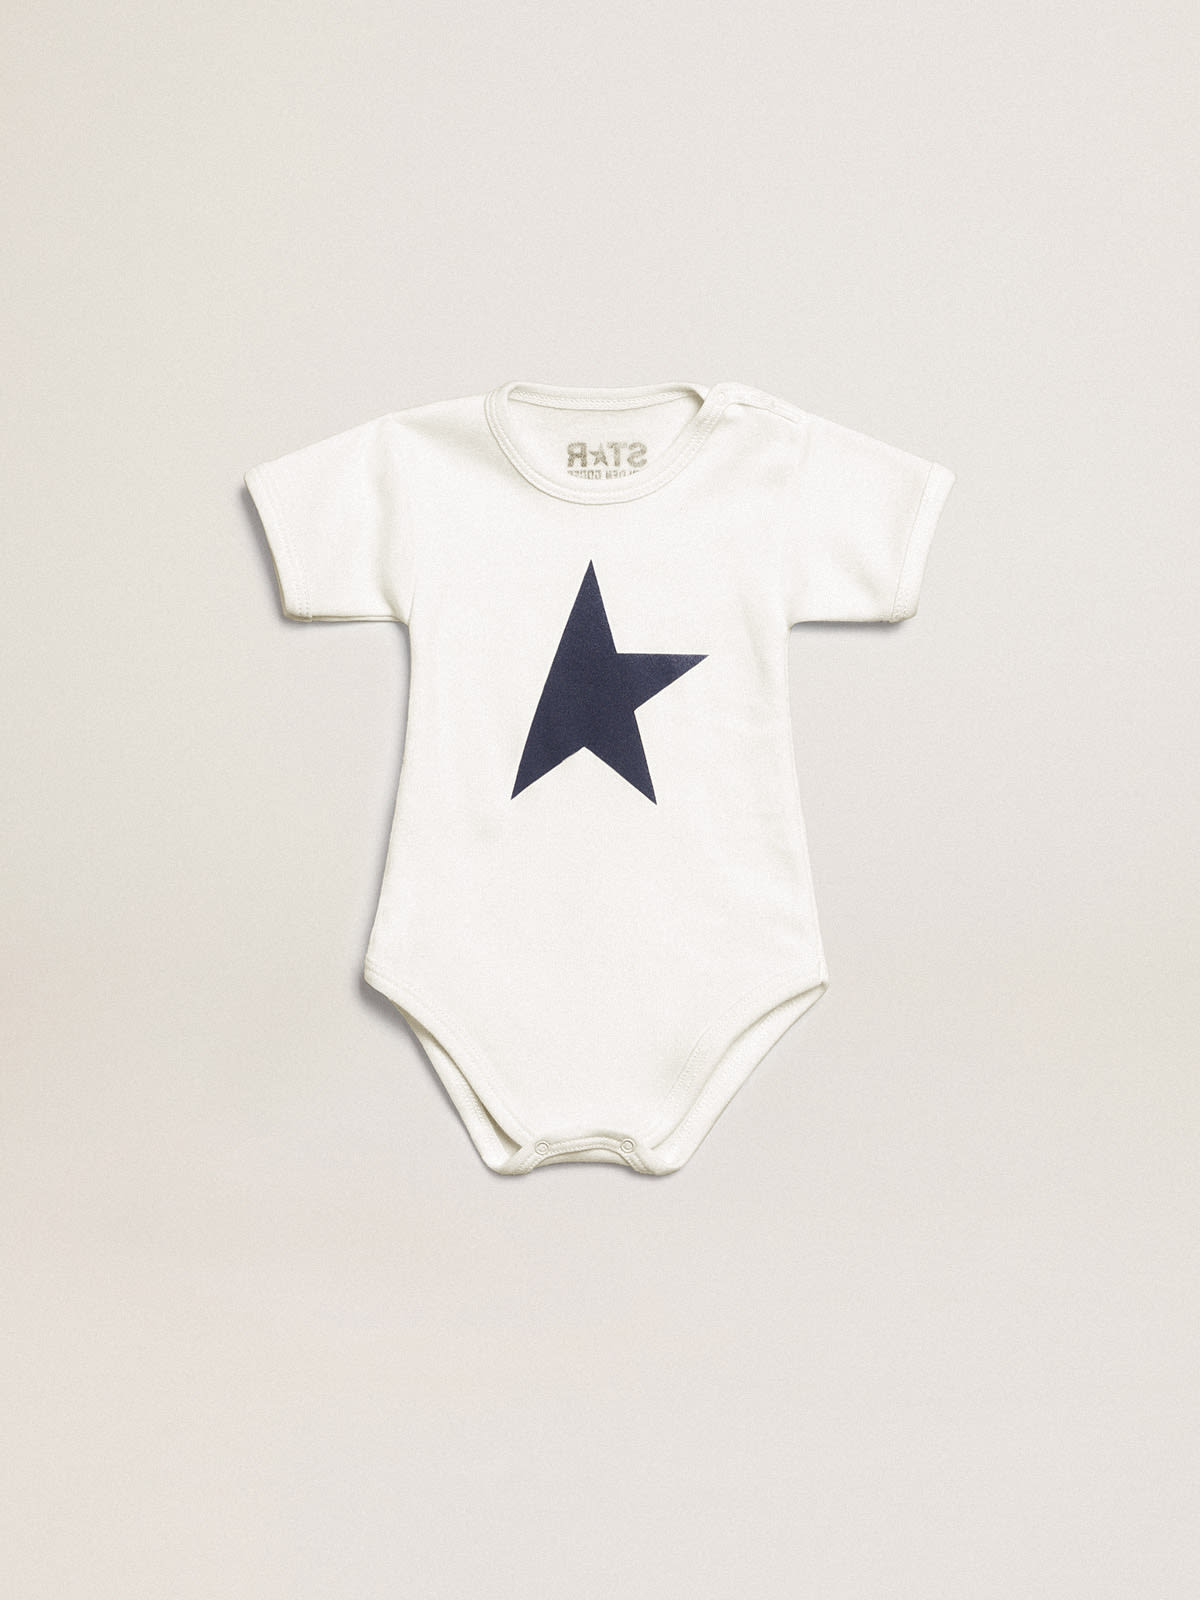 Golden Goose - Star Collection bath set gift box in white and milk white with contrasting navy blue edging and logo in 